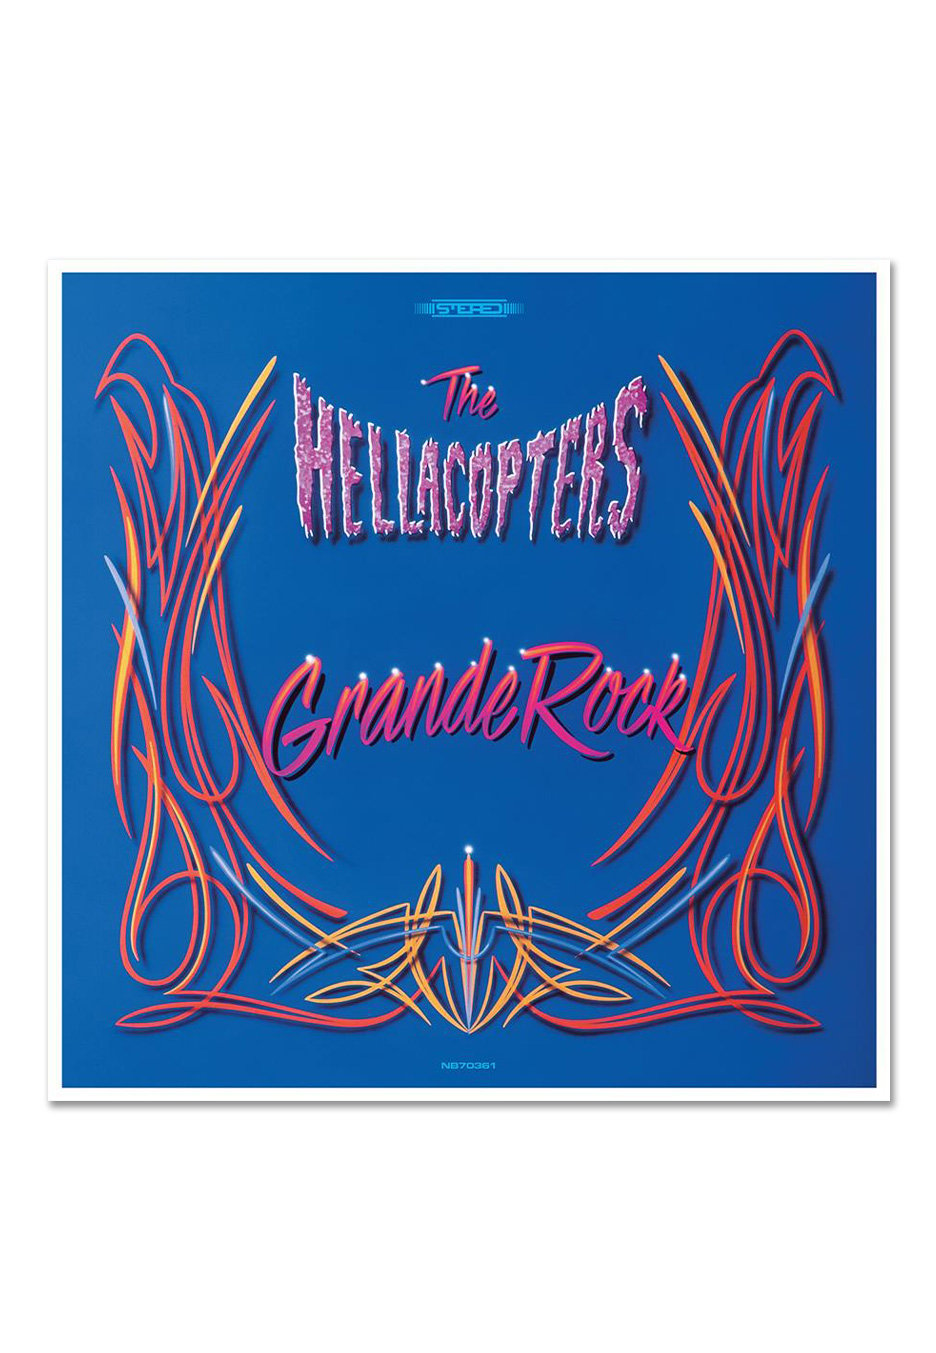 The Hellacopters - Grande Rock Revisited - 2 CD